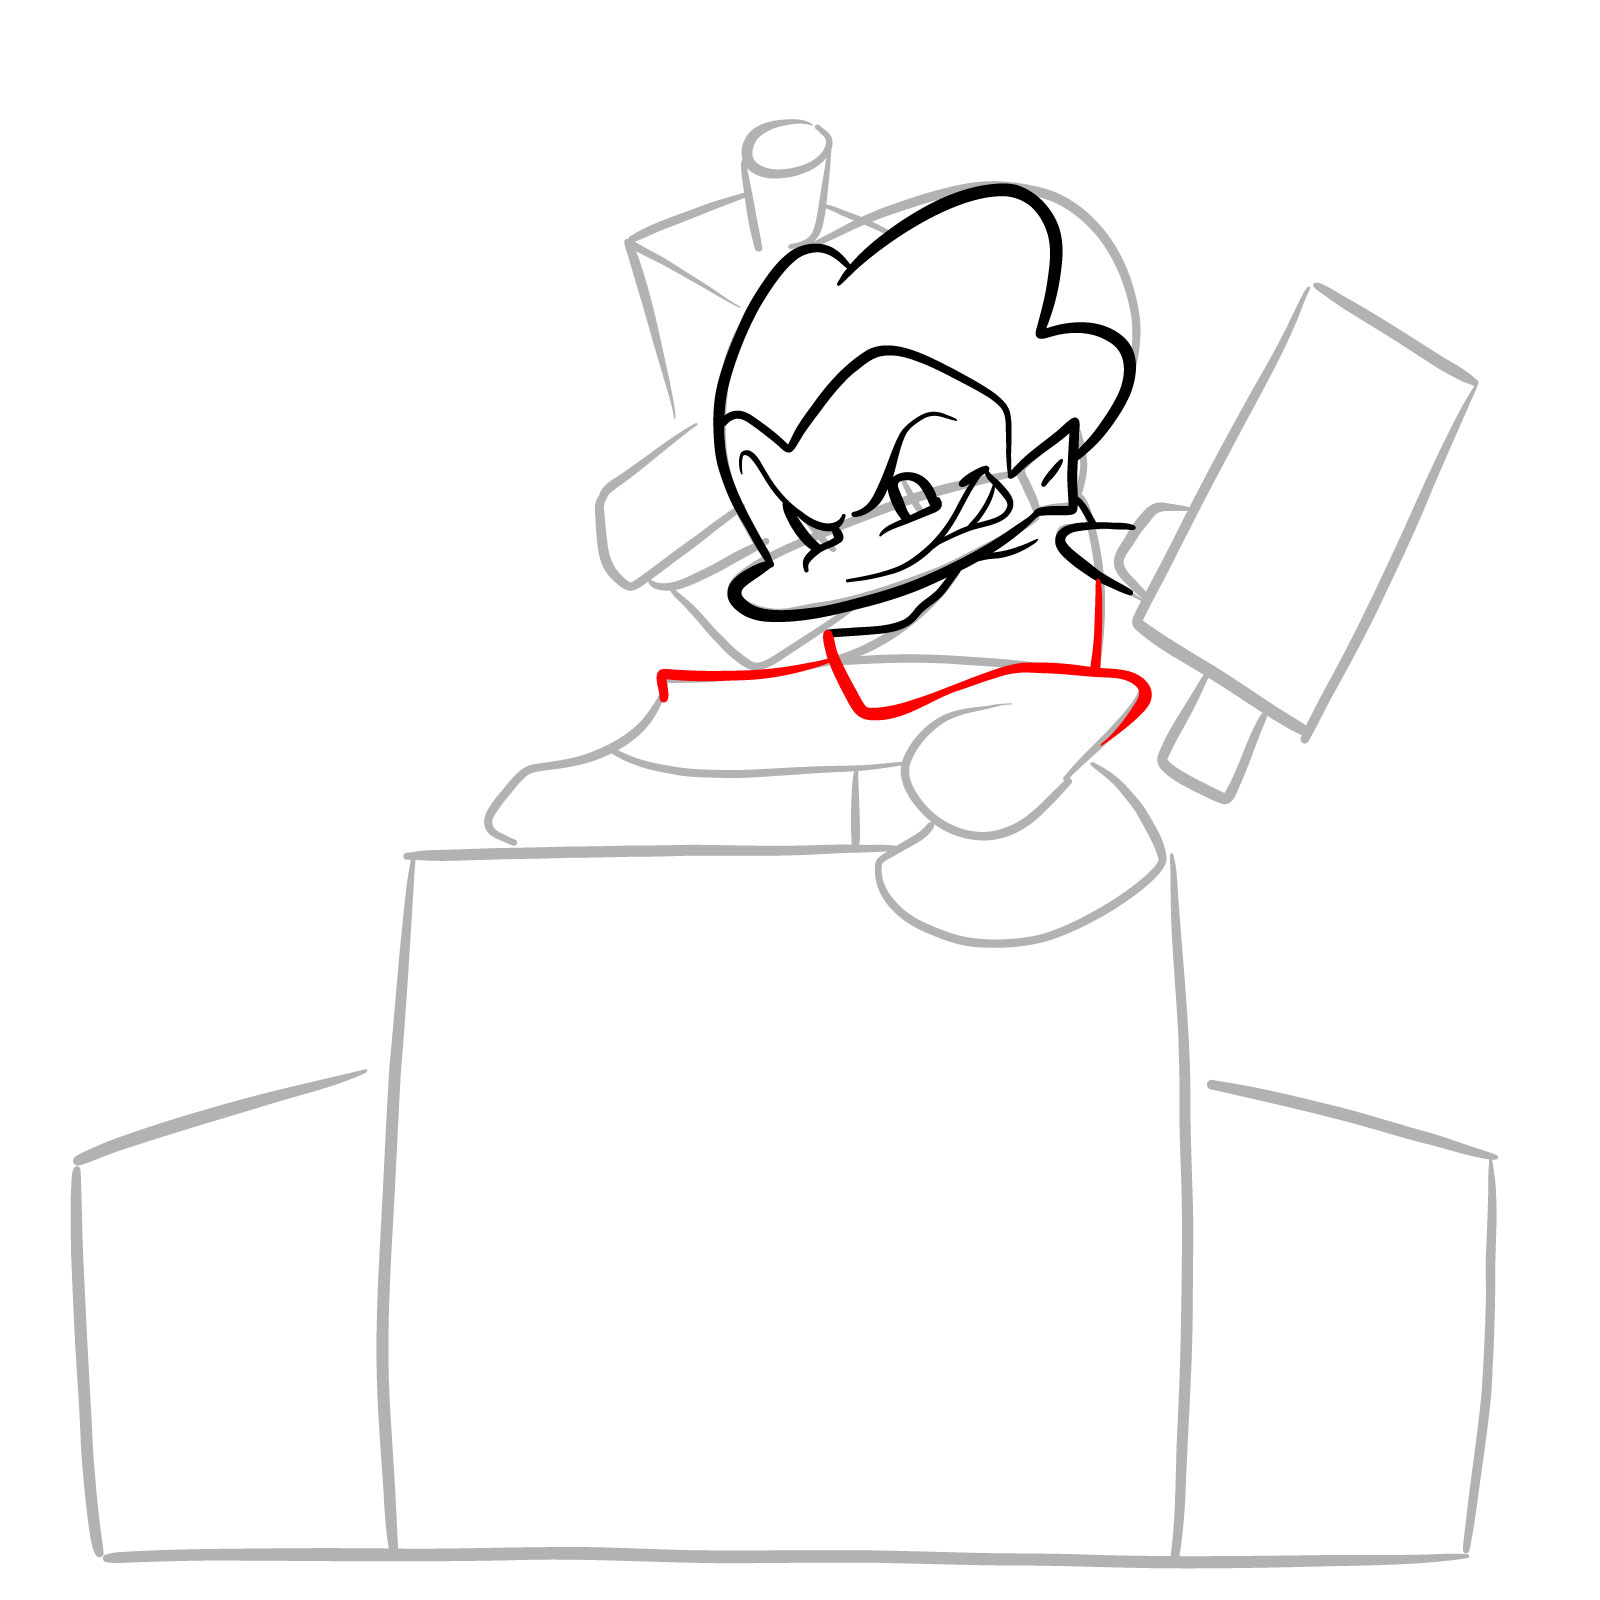 How to draw Pico on the speakers - step 11